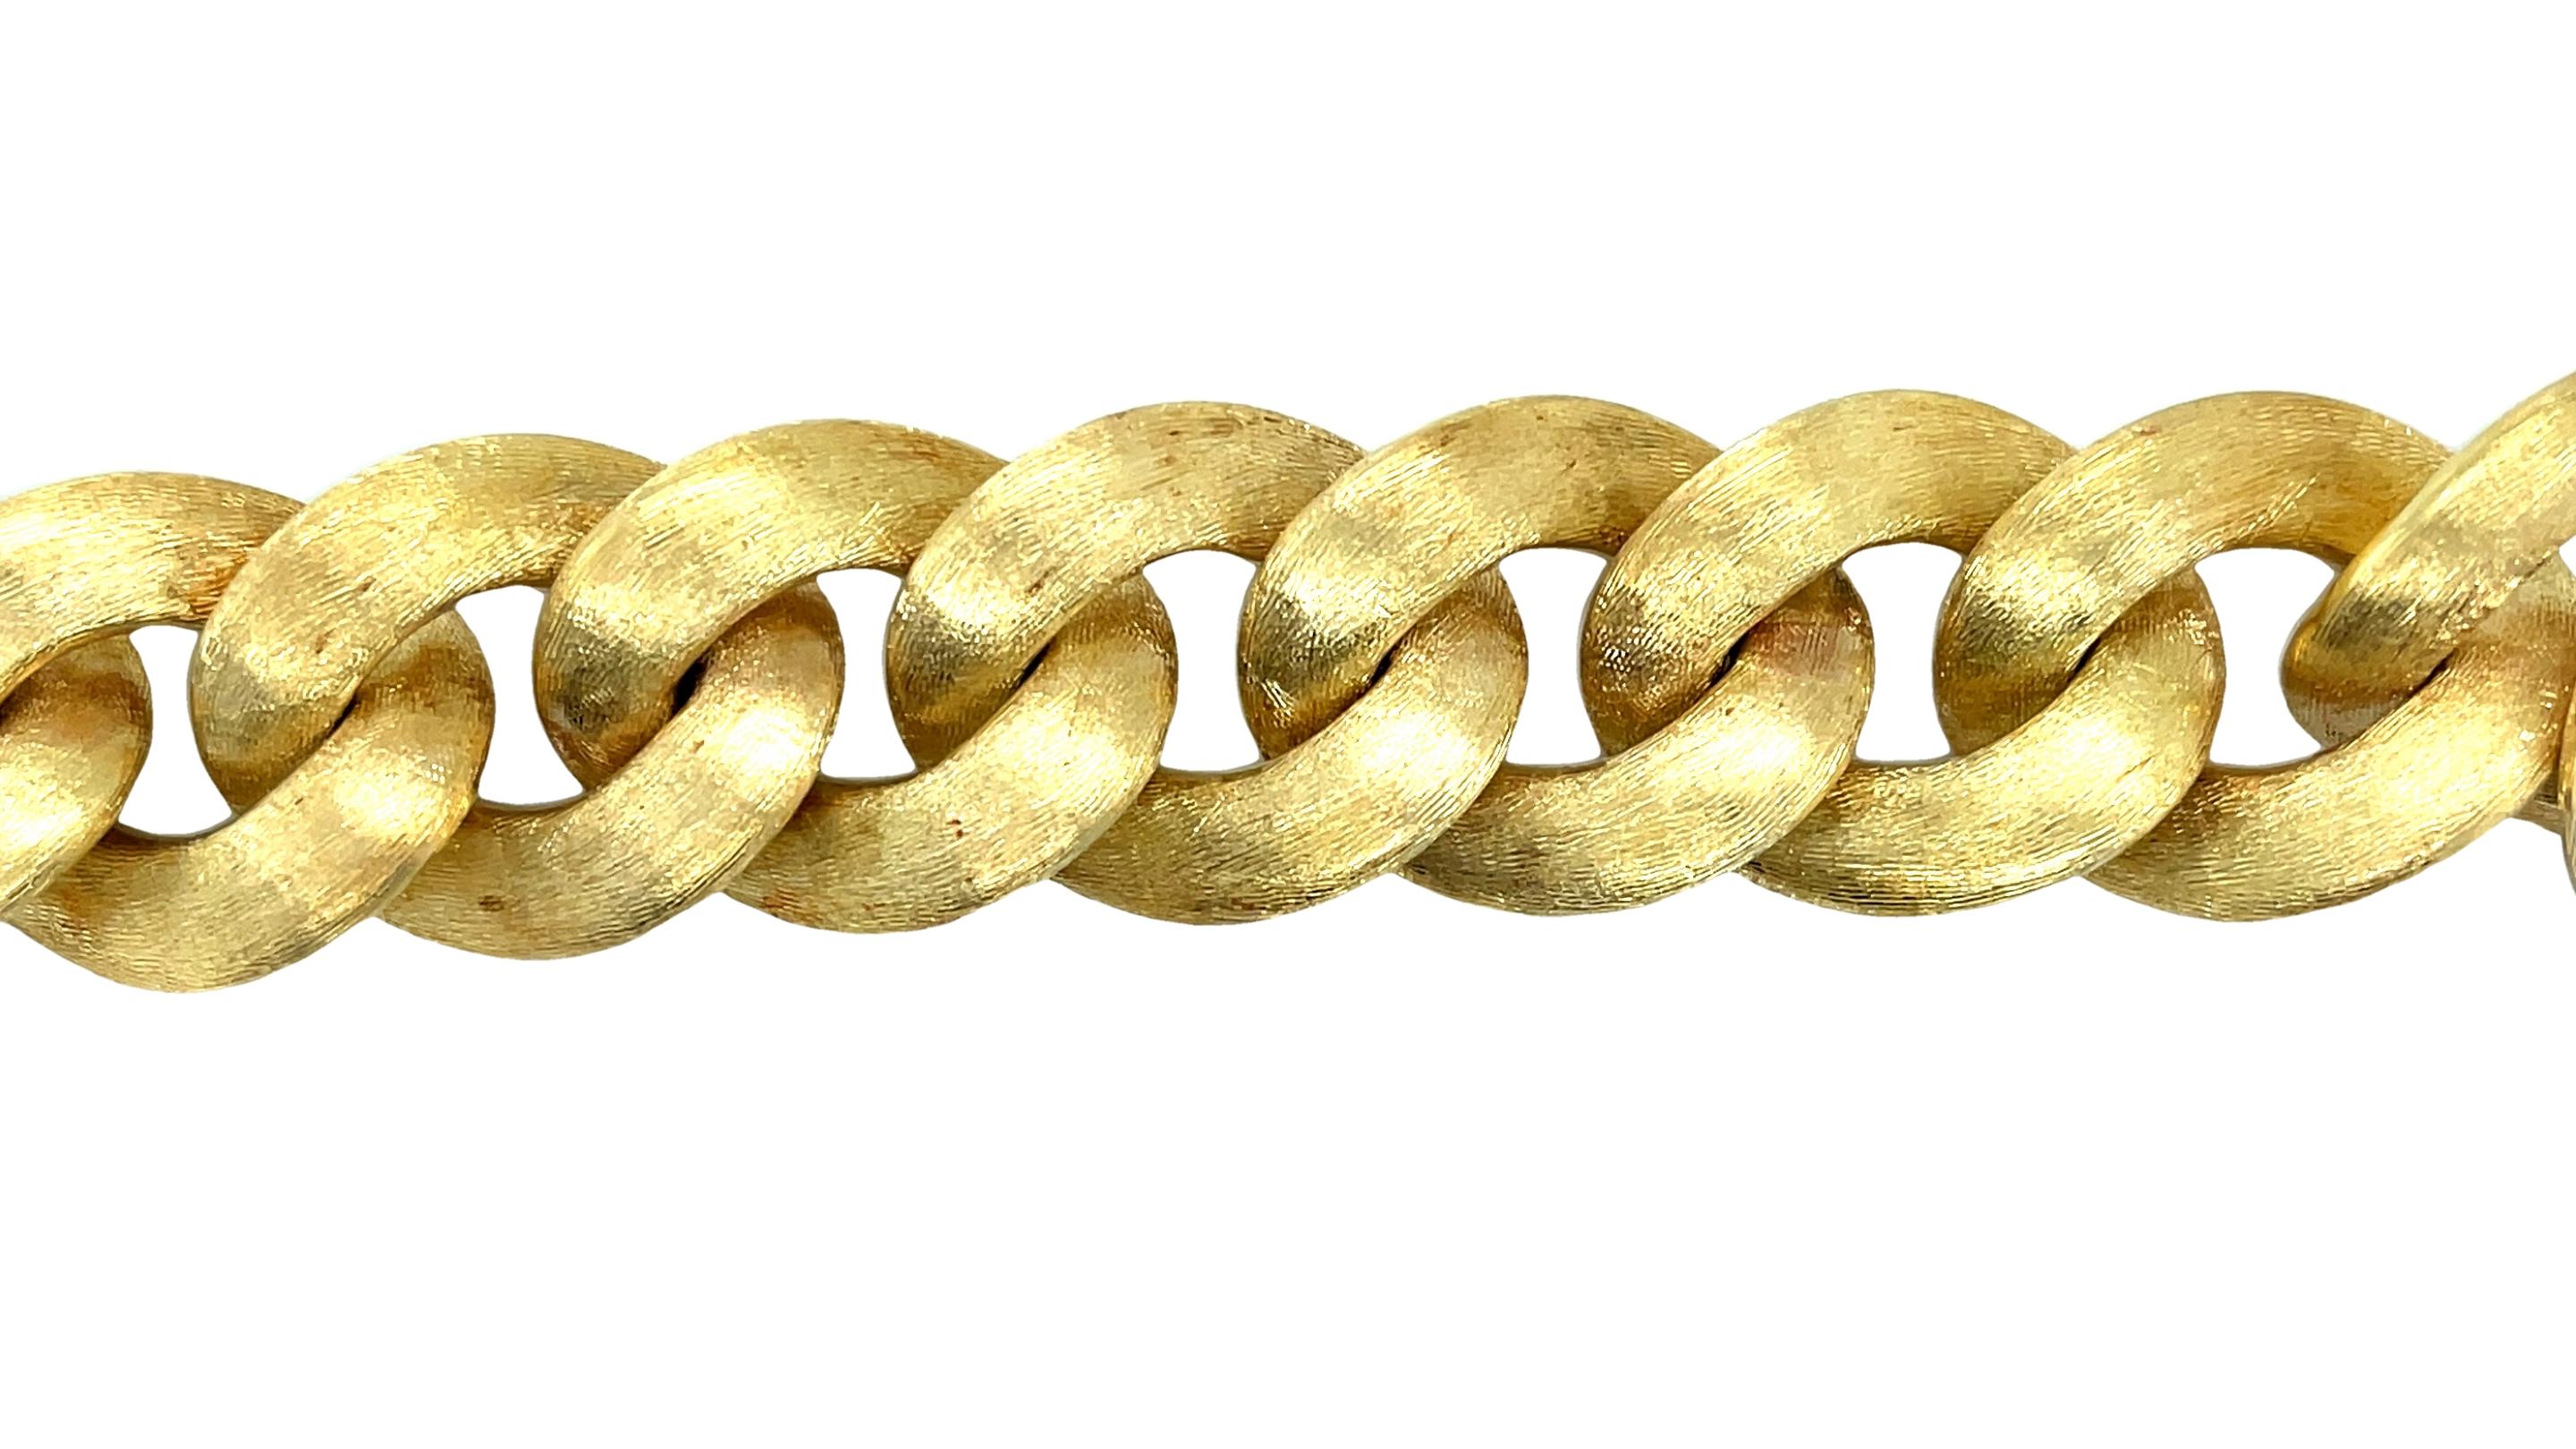 This eye-catching 18k yellow gold Italian link bracelet is an impressive statement of high fashion and quality! Stunning, 20mm wide links have elegant contouring and a gorgeous Florentine brushed finish that will make you feel wrapped in luxury!